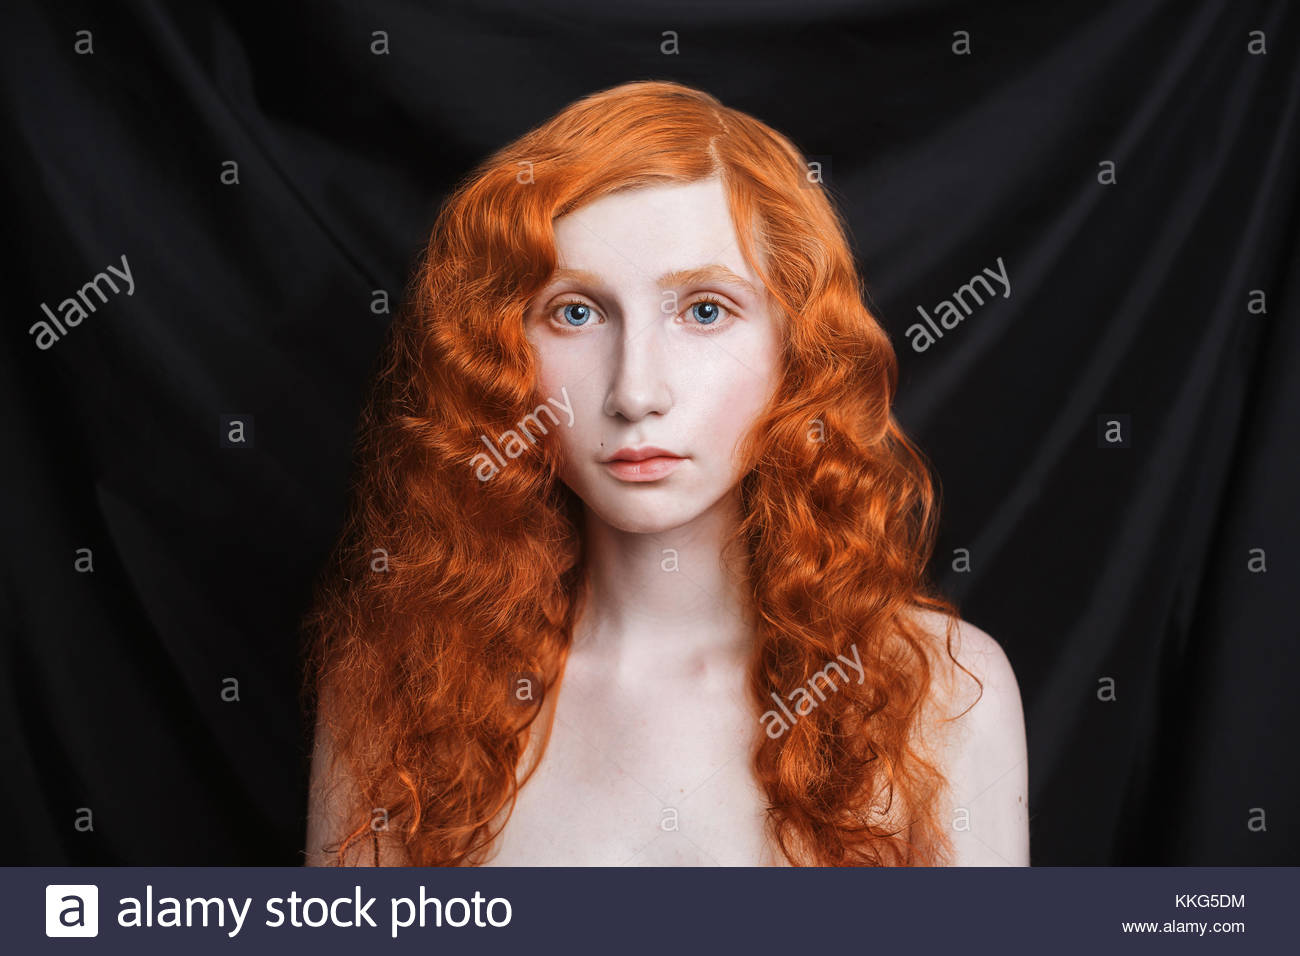 Woman With Long Curly Red Flowing Hair On A Black Background Stock